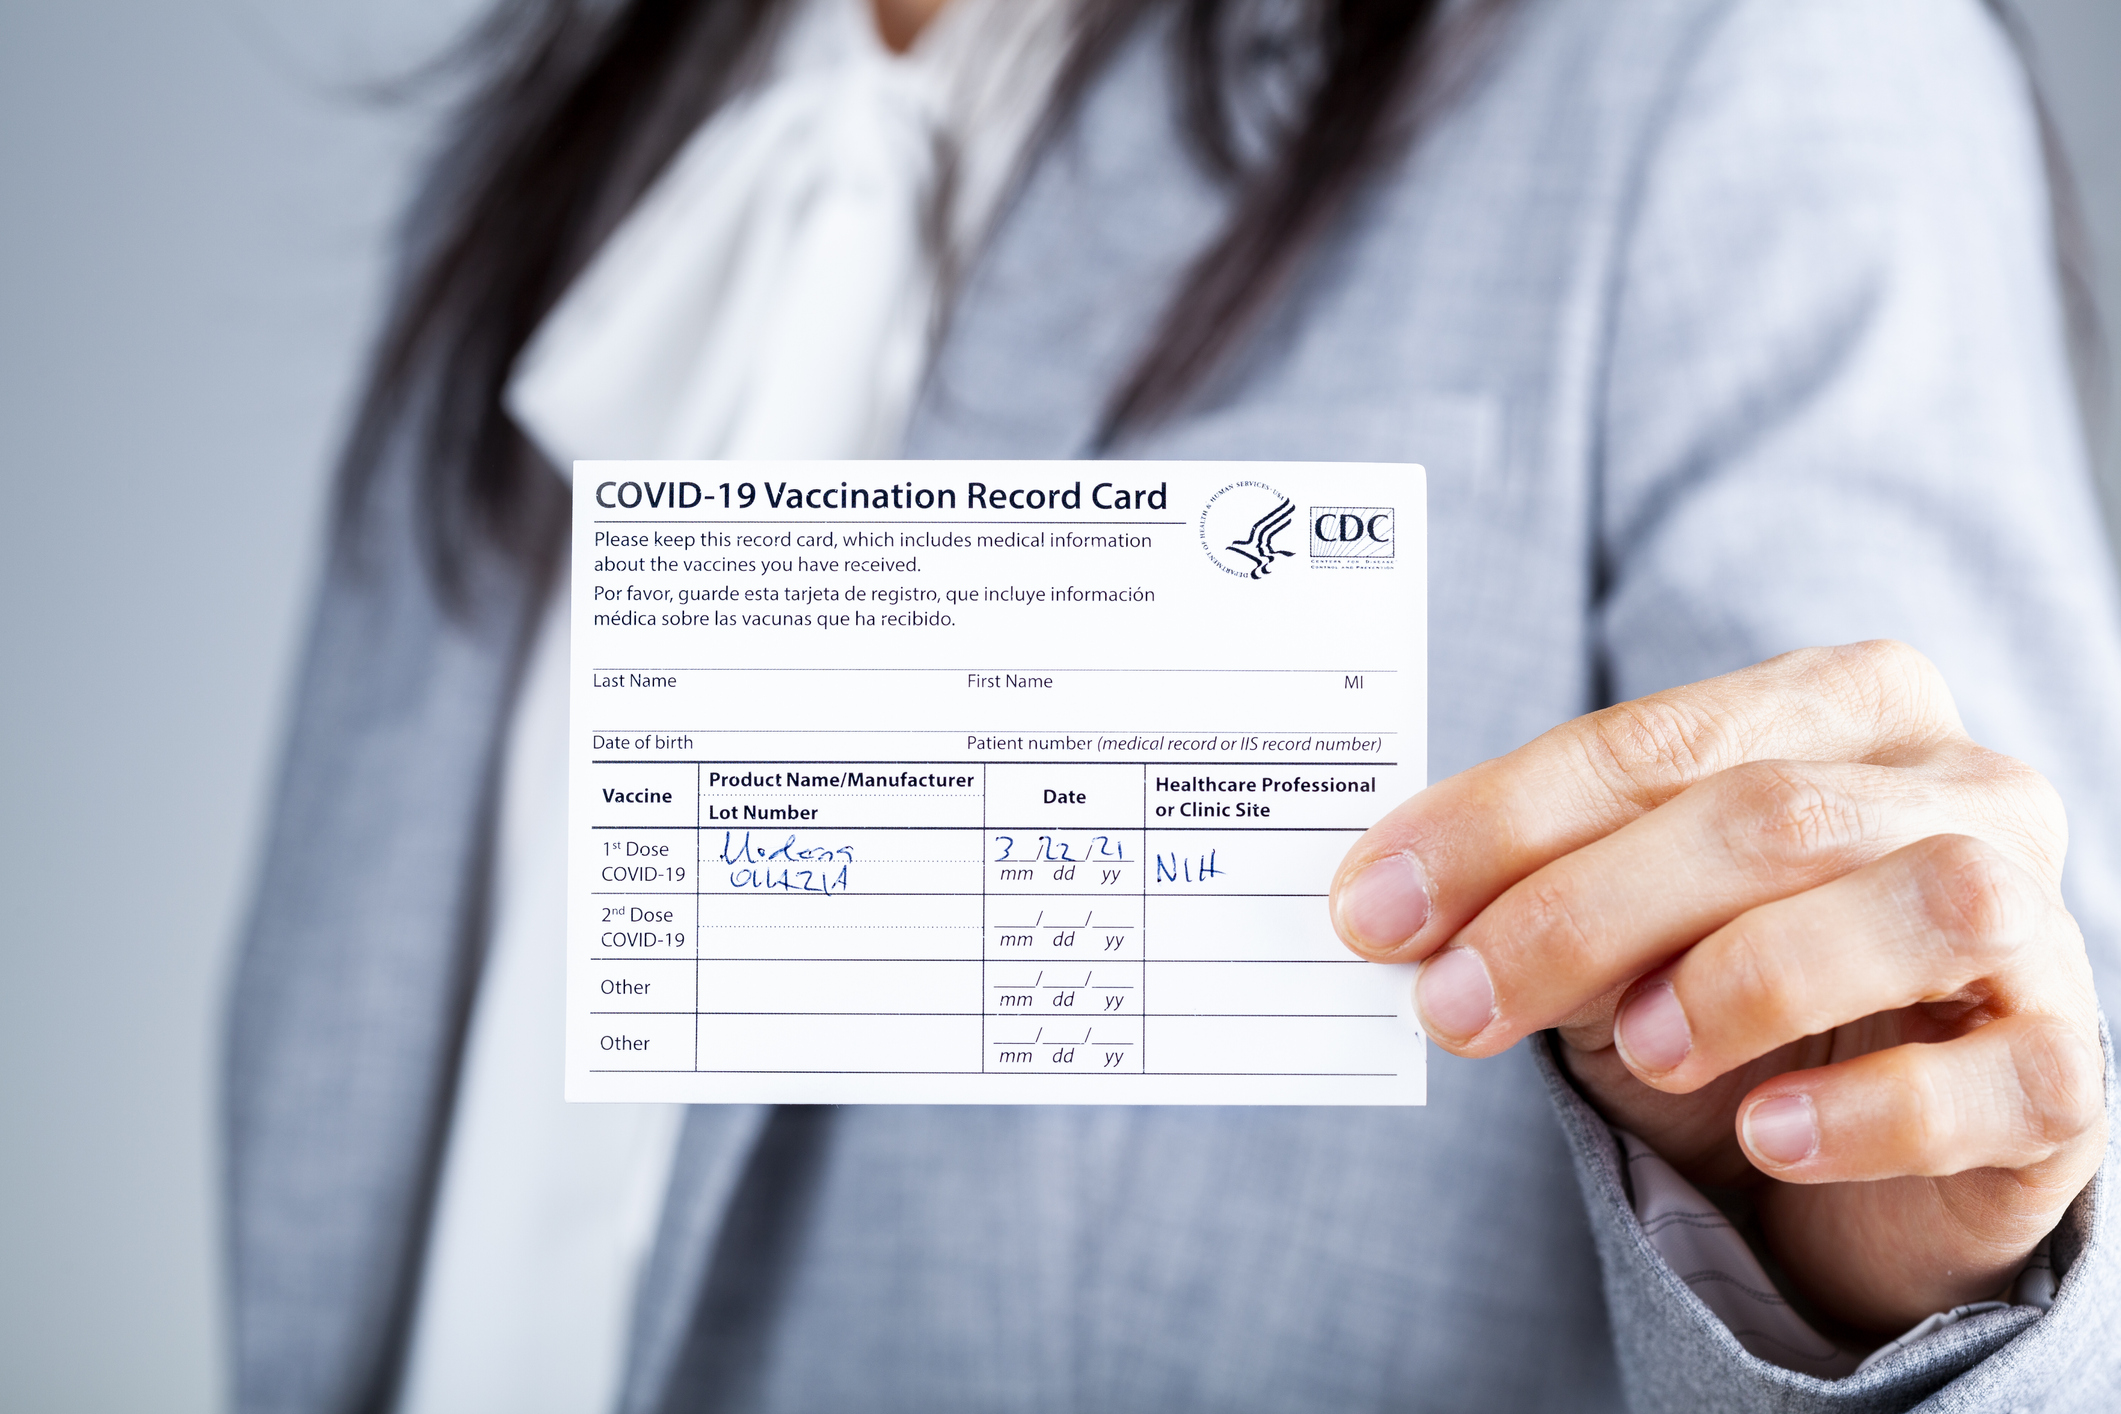 Covid-19 vaccine card issued by U.S. Centers for Disease Control and Prevention (photo via iStock)